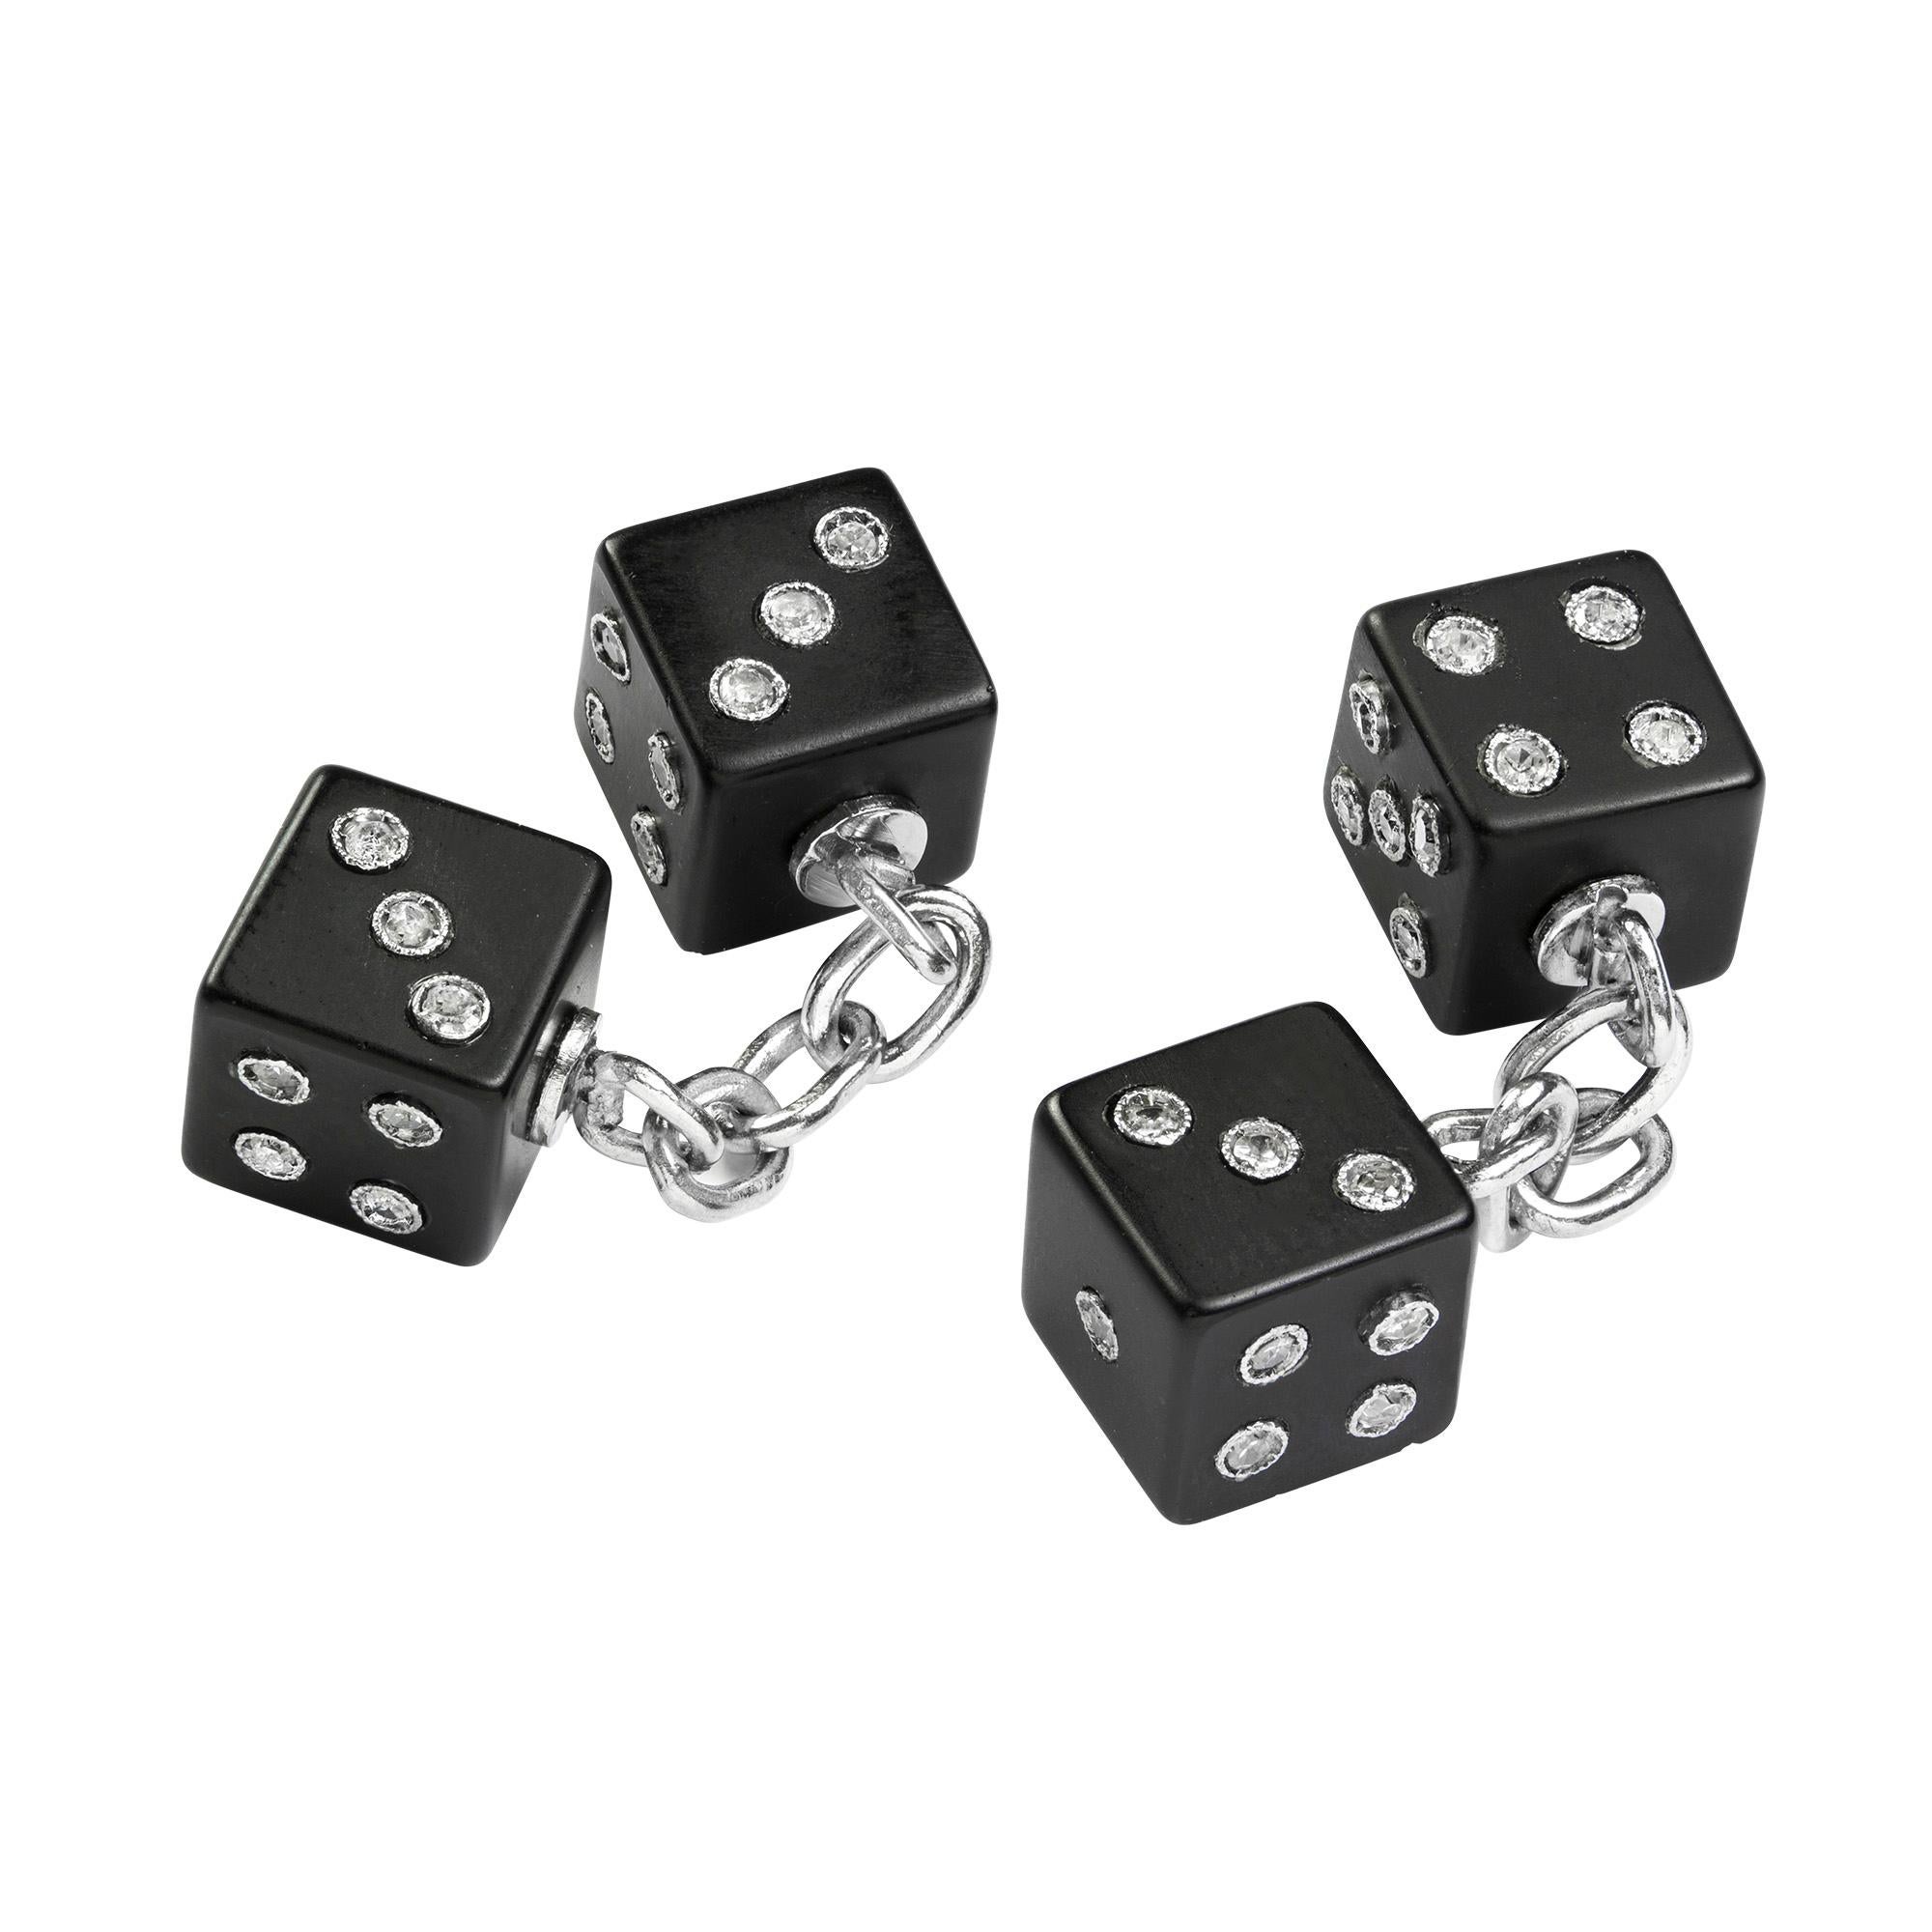 A pair of Art Deco onyx and diamond dice cufflinks, each comprising two square onyx dice, each onyx face measuring 8 x 8 mm, the dots rubover set single-cut diamonds, linked by a white gold chain, circa 1930, each dice measuring approximately